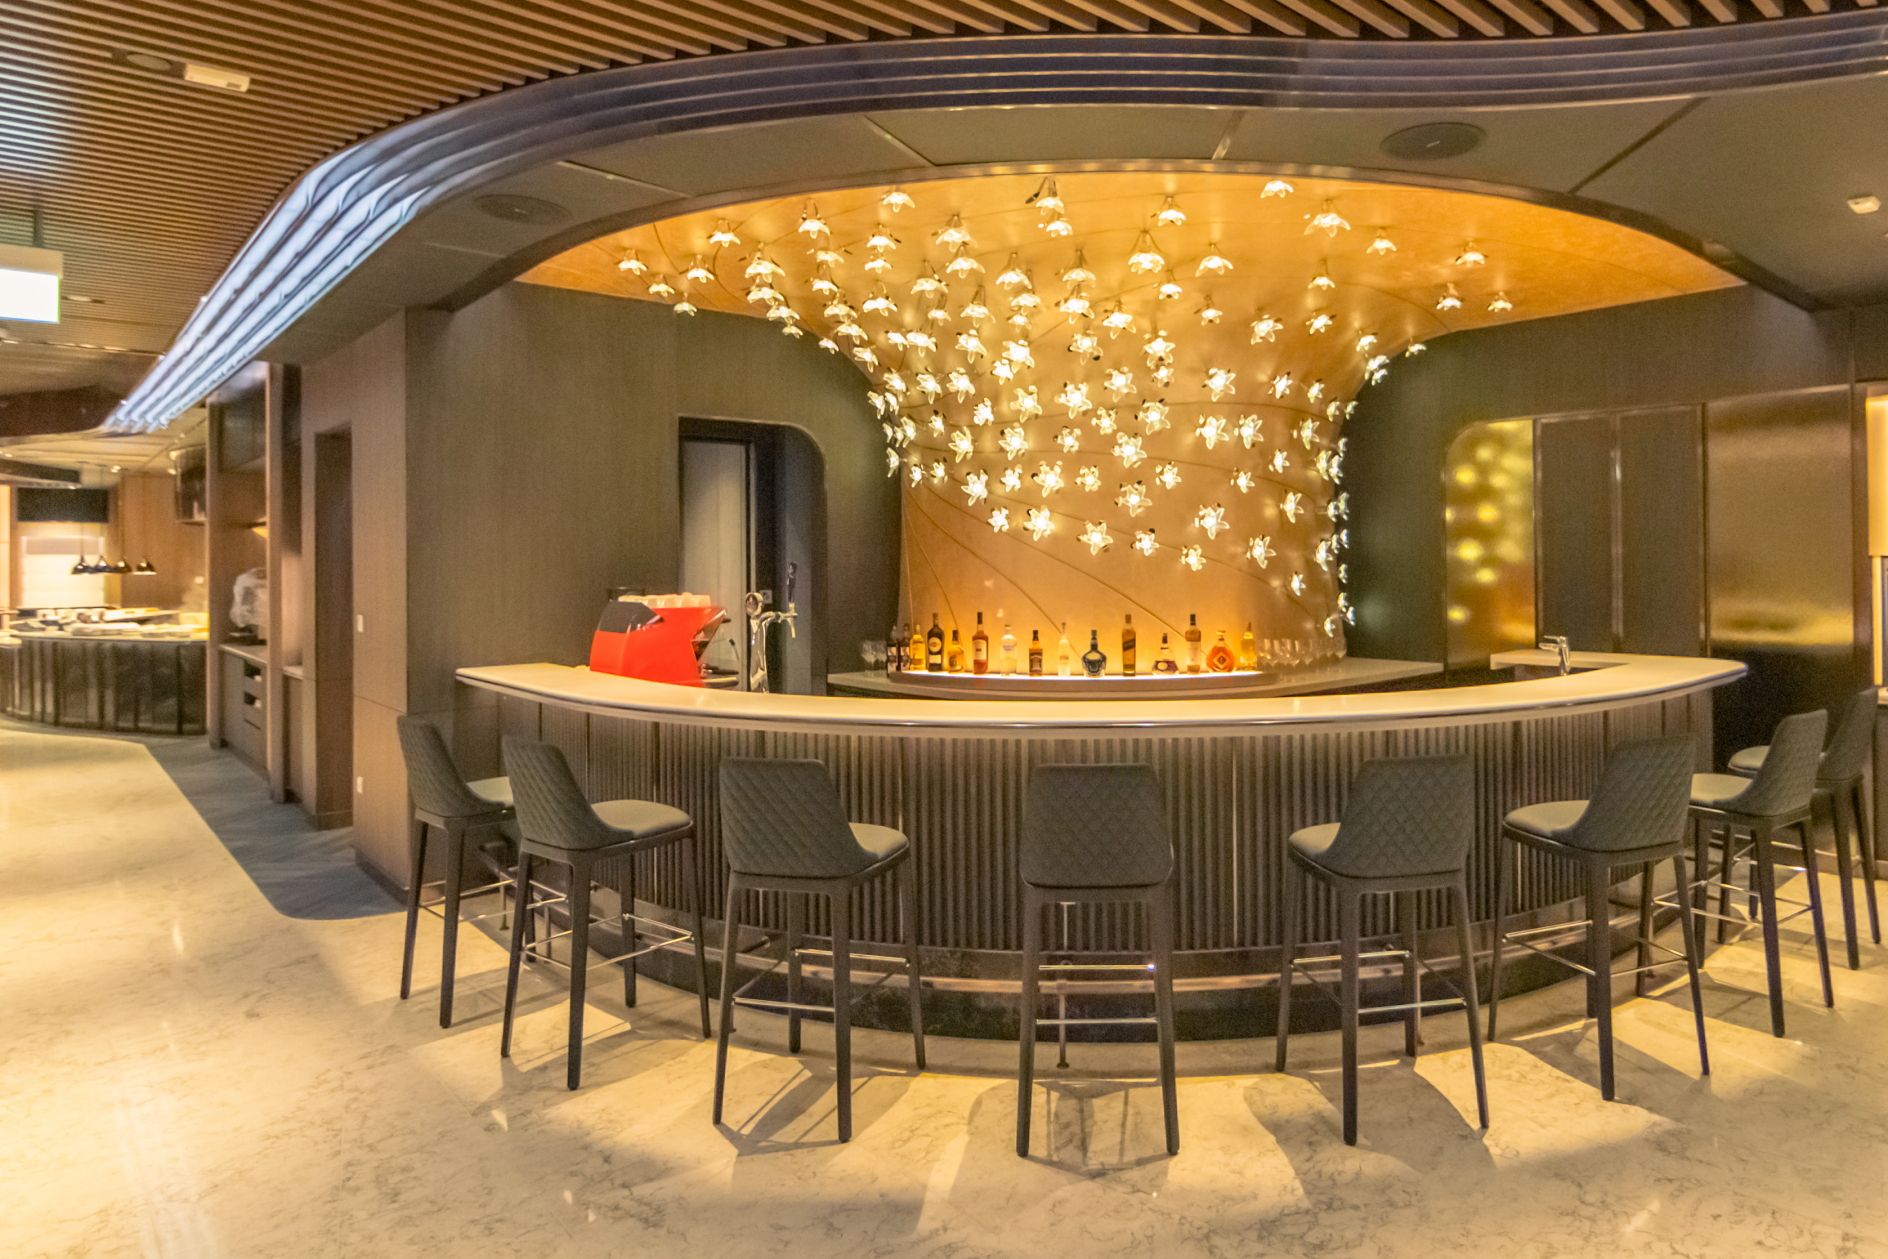 Lalique Crystal Bar at Singapore Airlines' First Class Lounge at Changi Airport. Click to enlarge.